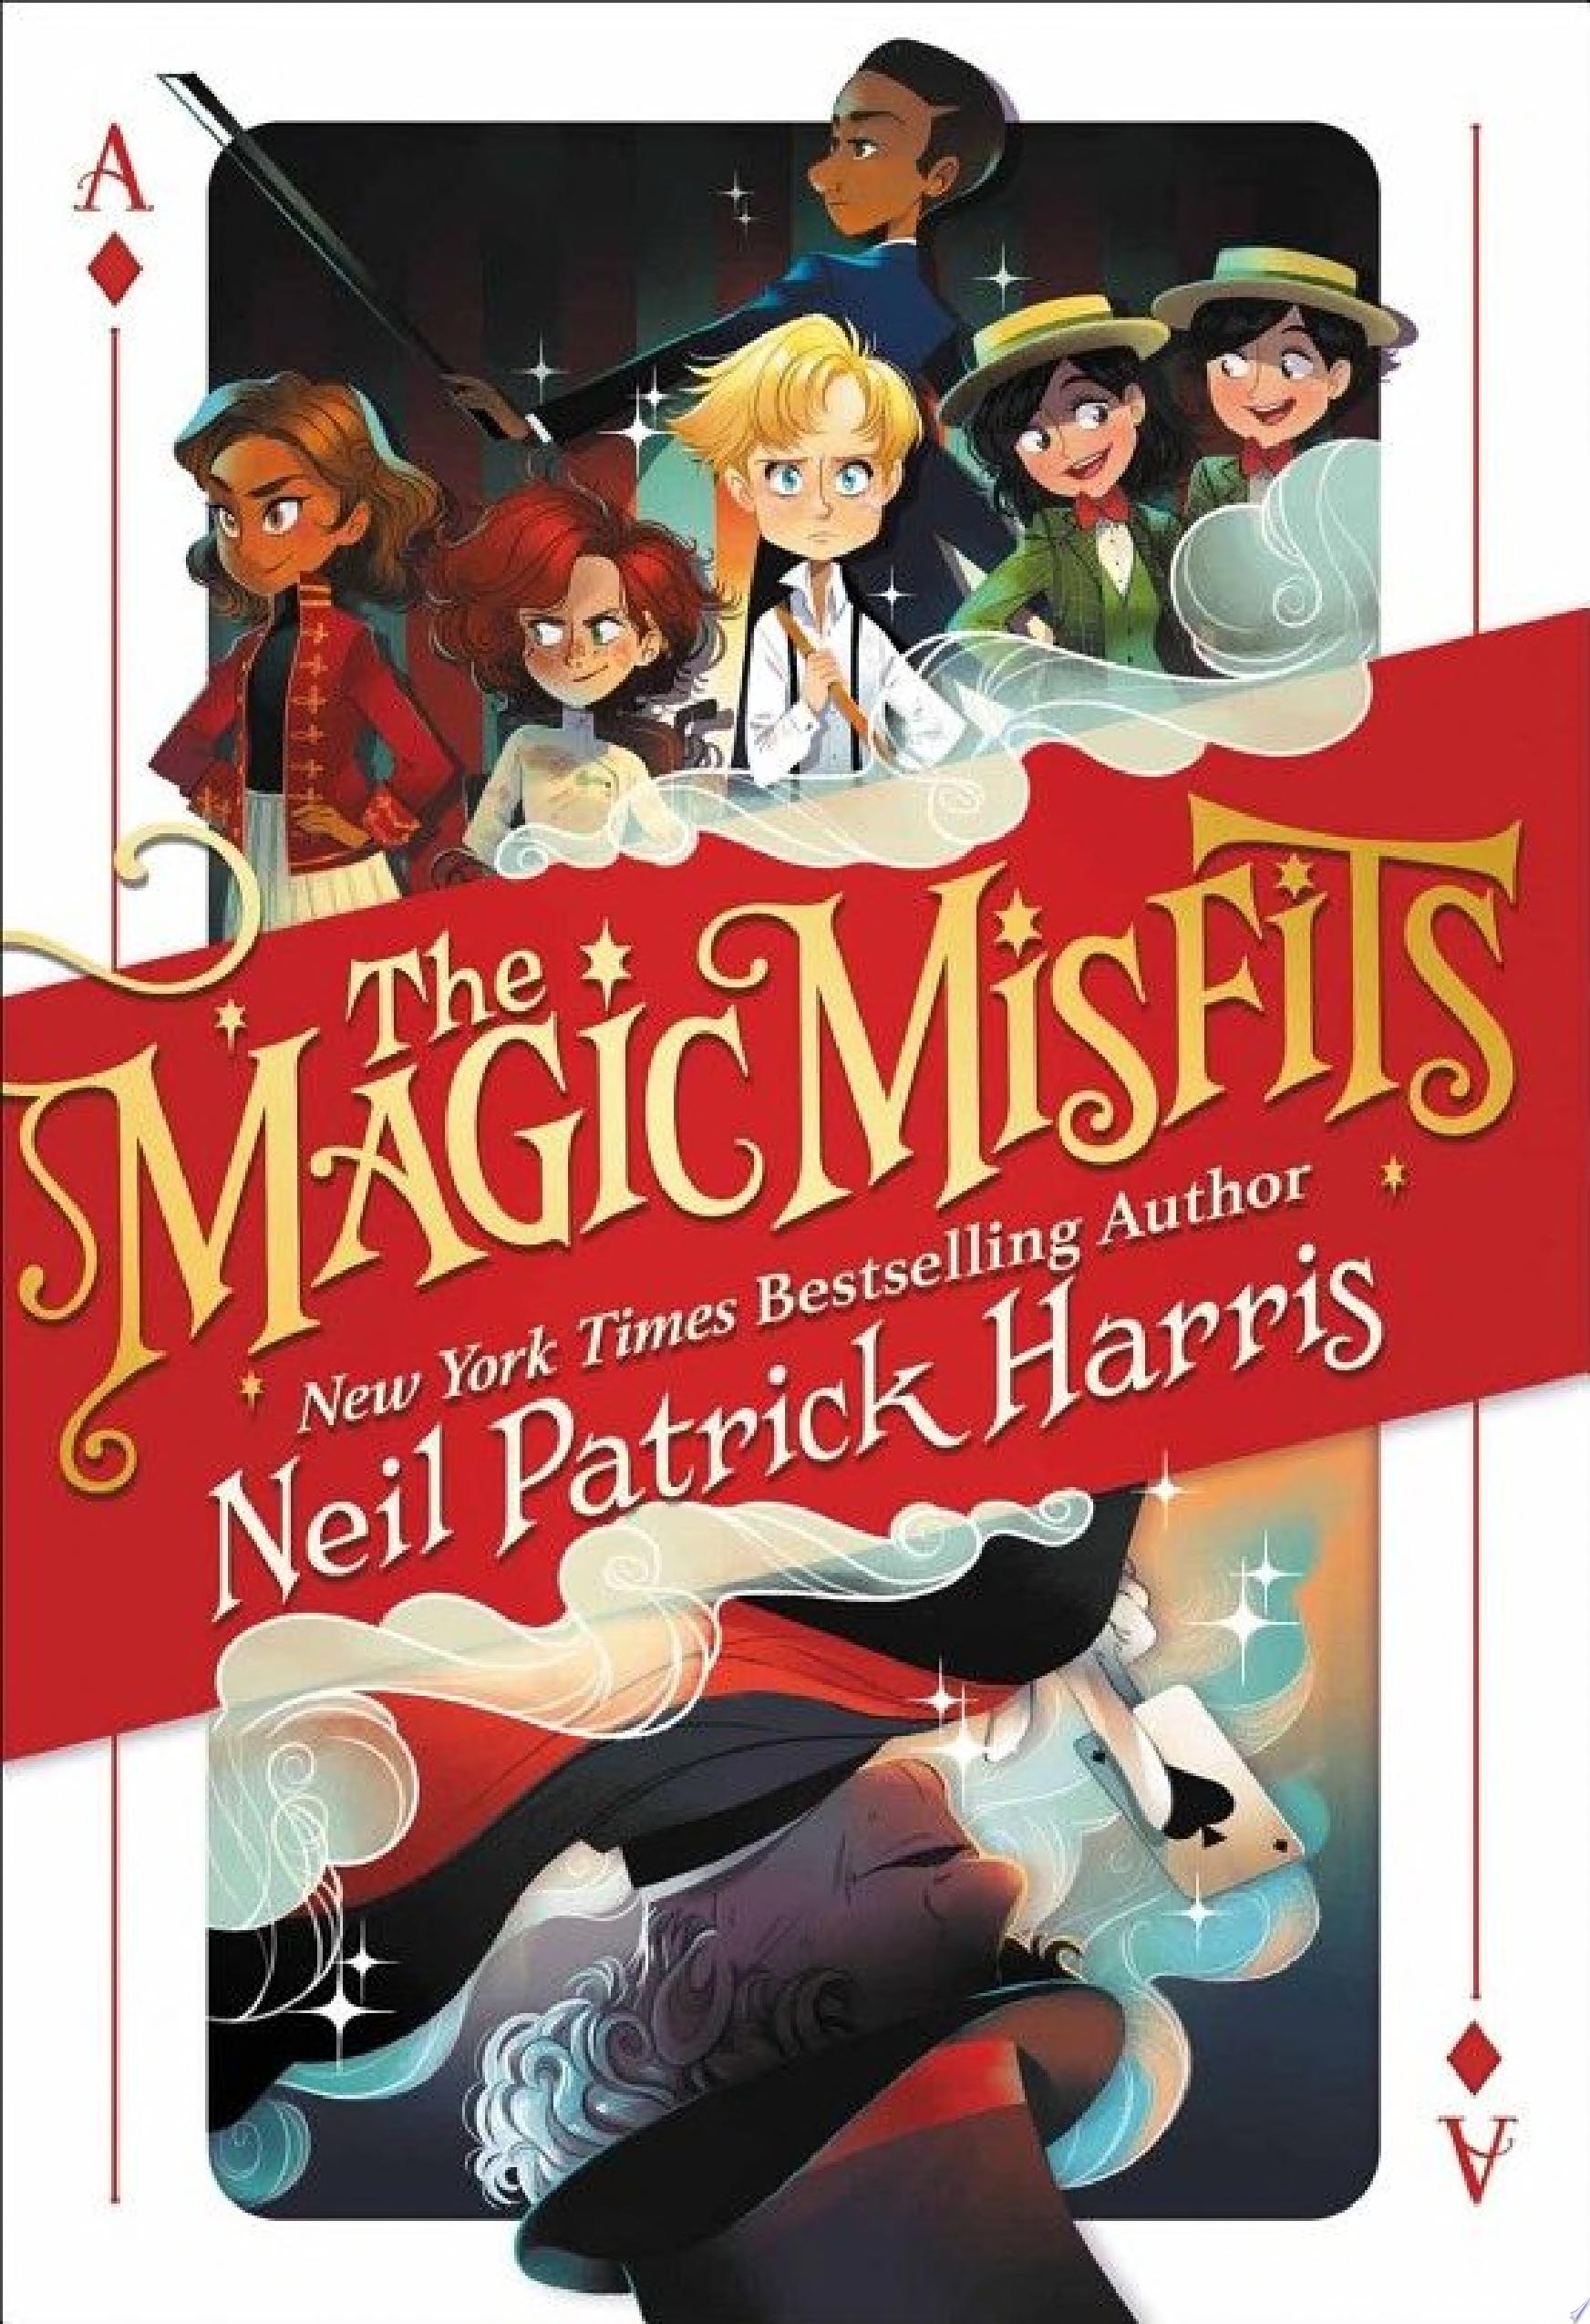 Image for "The Magic Misfits"